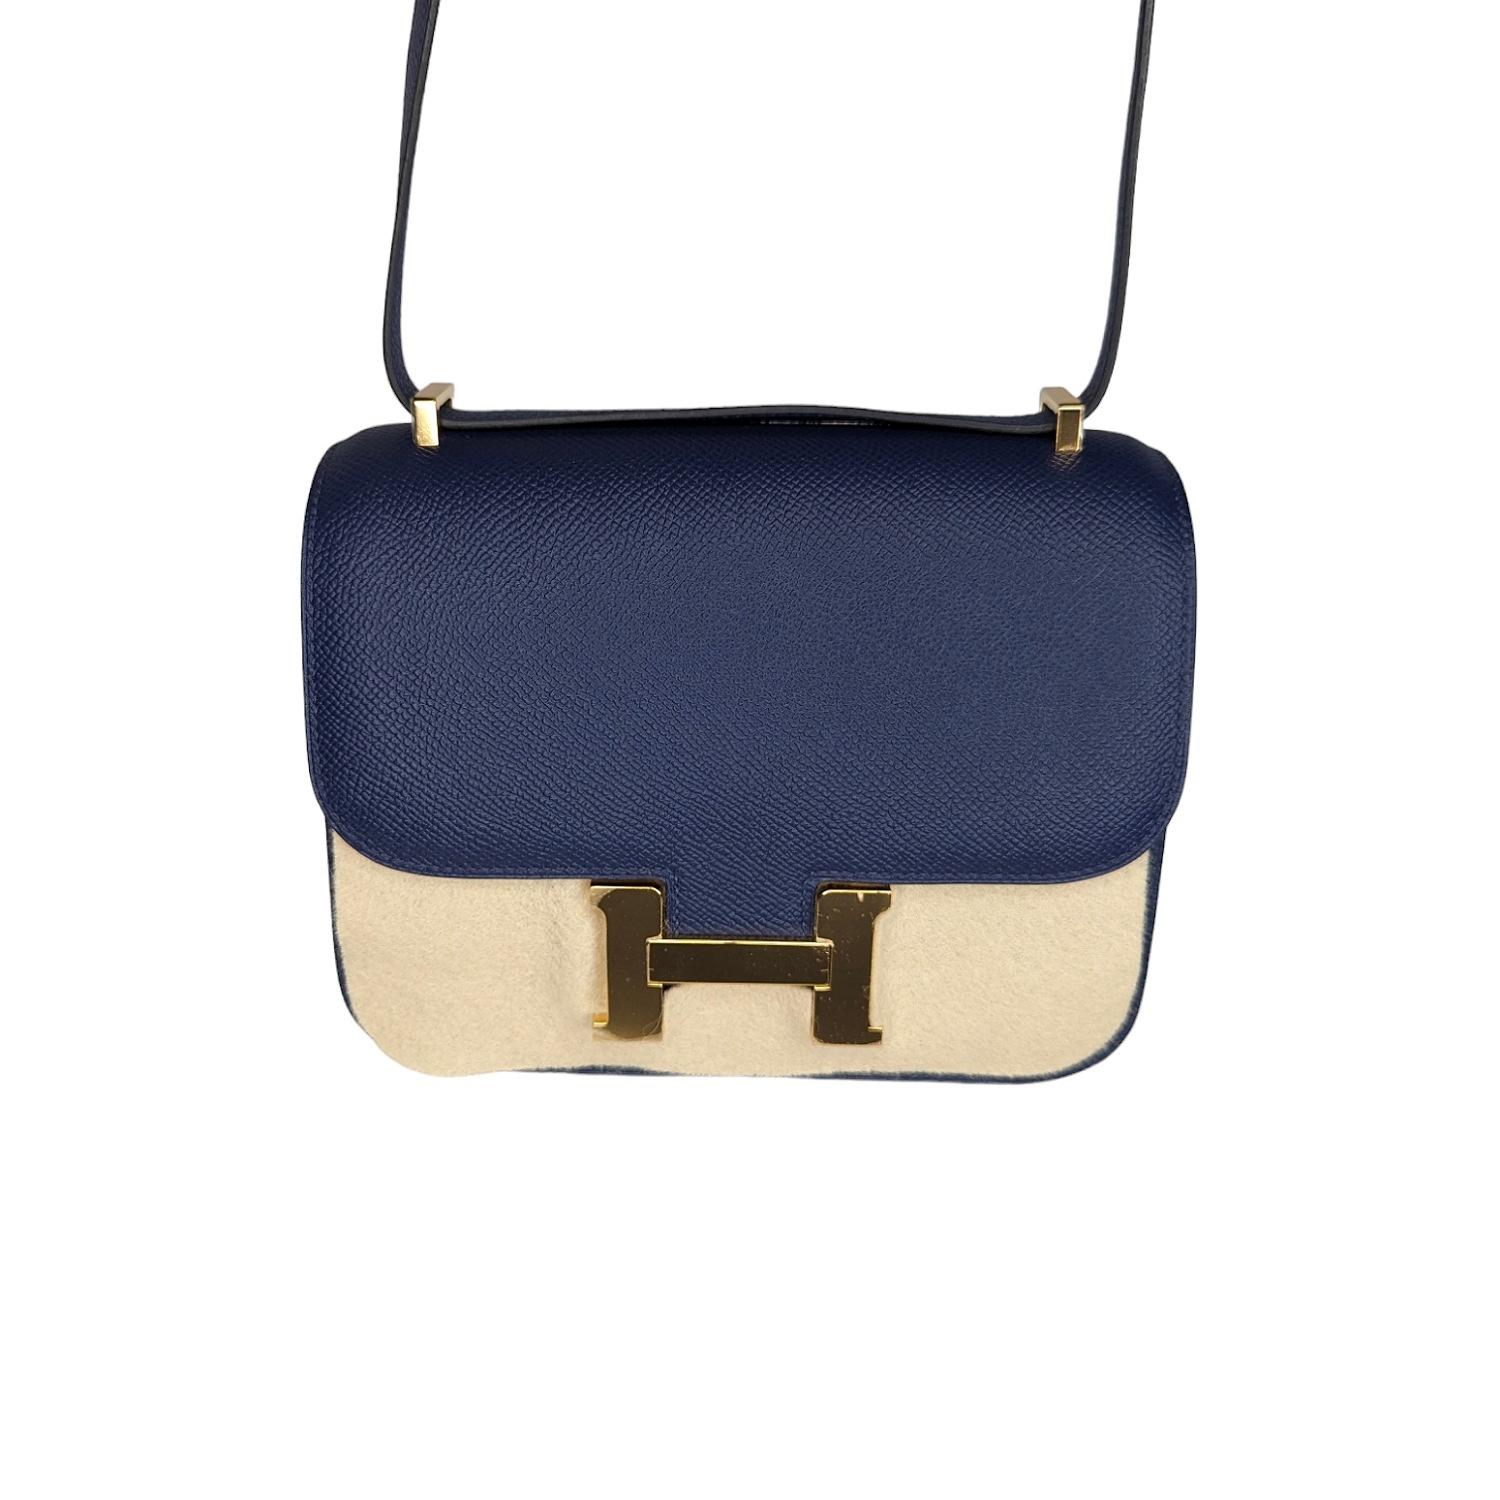 This stylish shoulder bag is finely crafted of Epsom leather in Bleu Saphir. The bag features a long shoulder strap with gold plated hardware including an H buckle at the flap. This opens to a compact partitioned Agneau lambskin leather interior